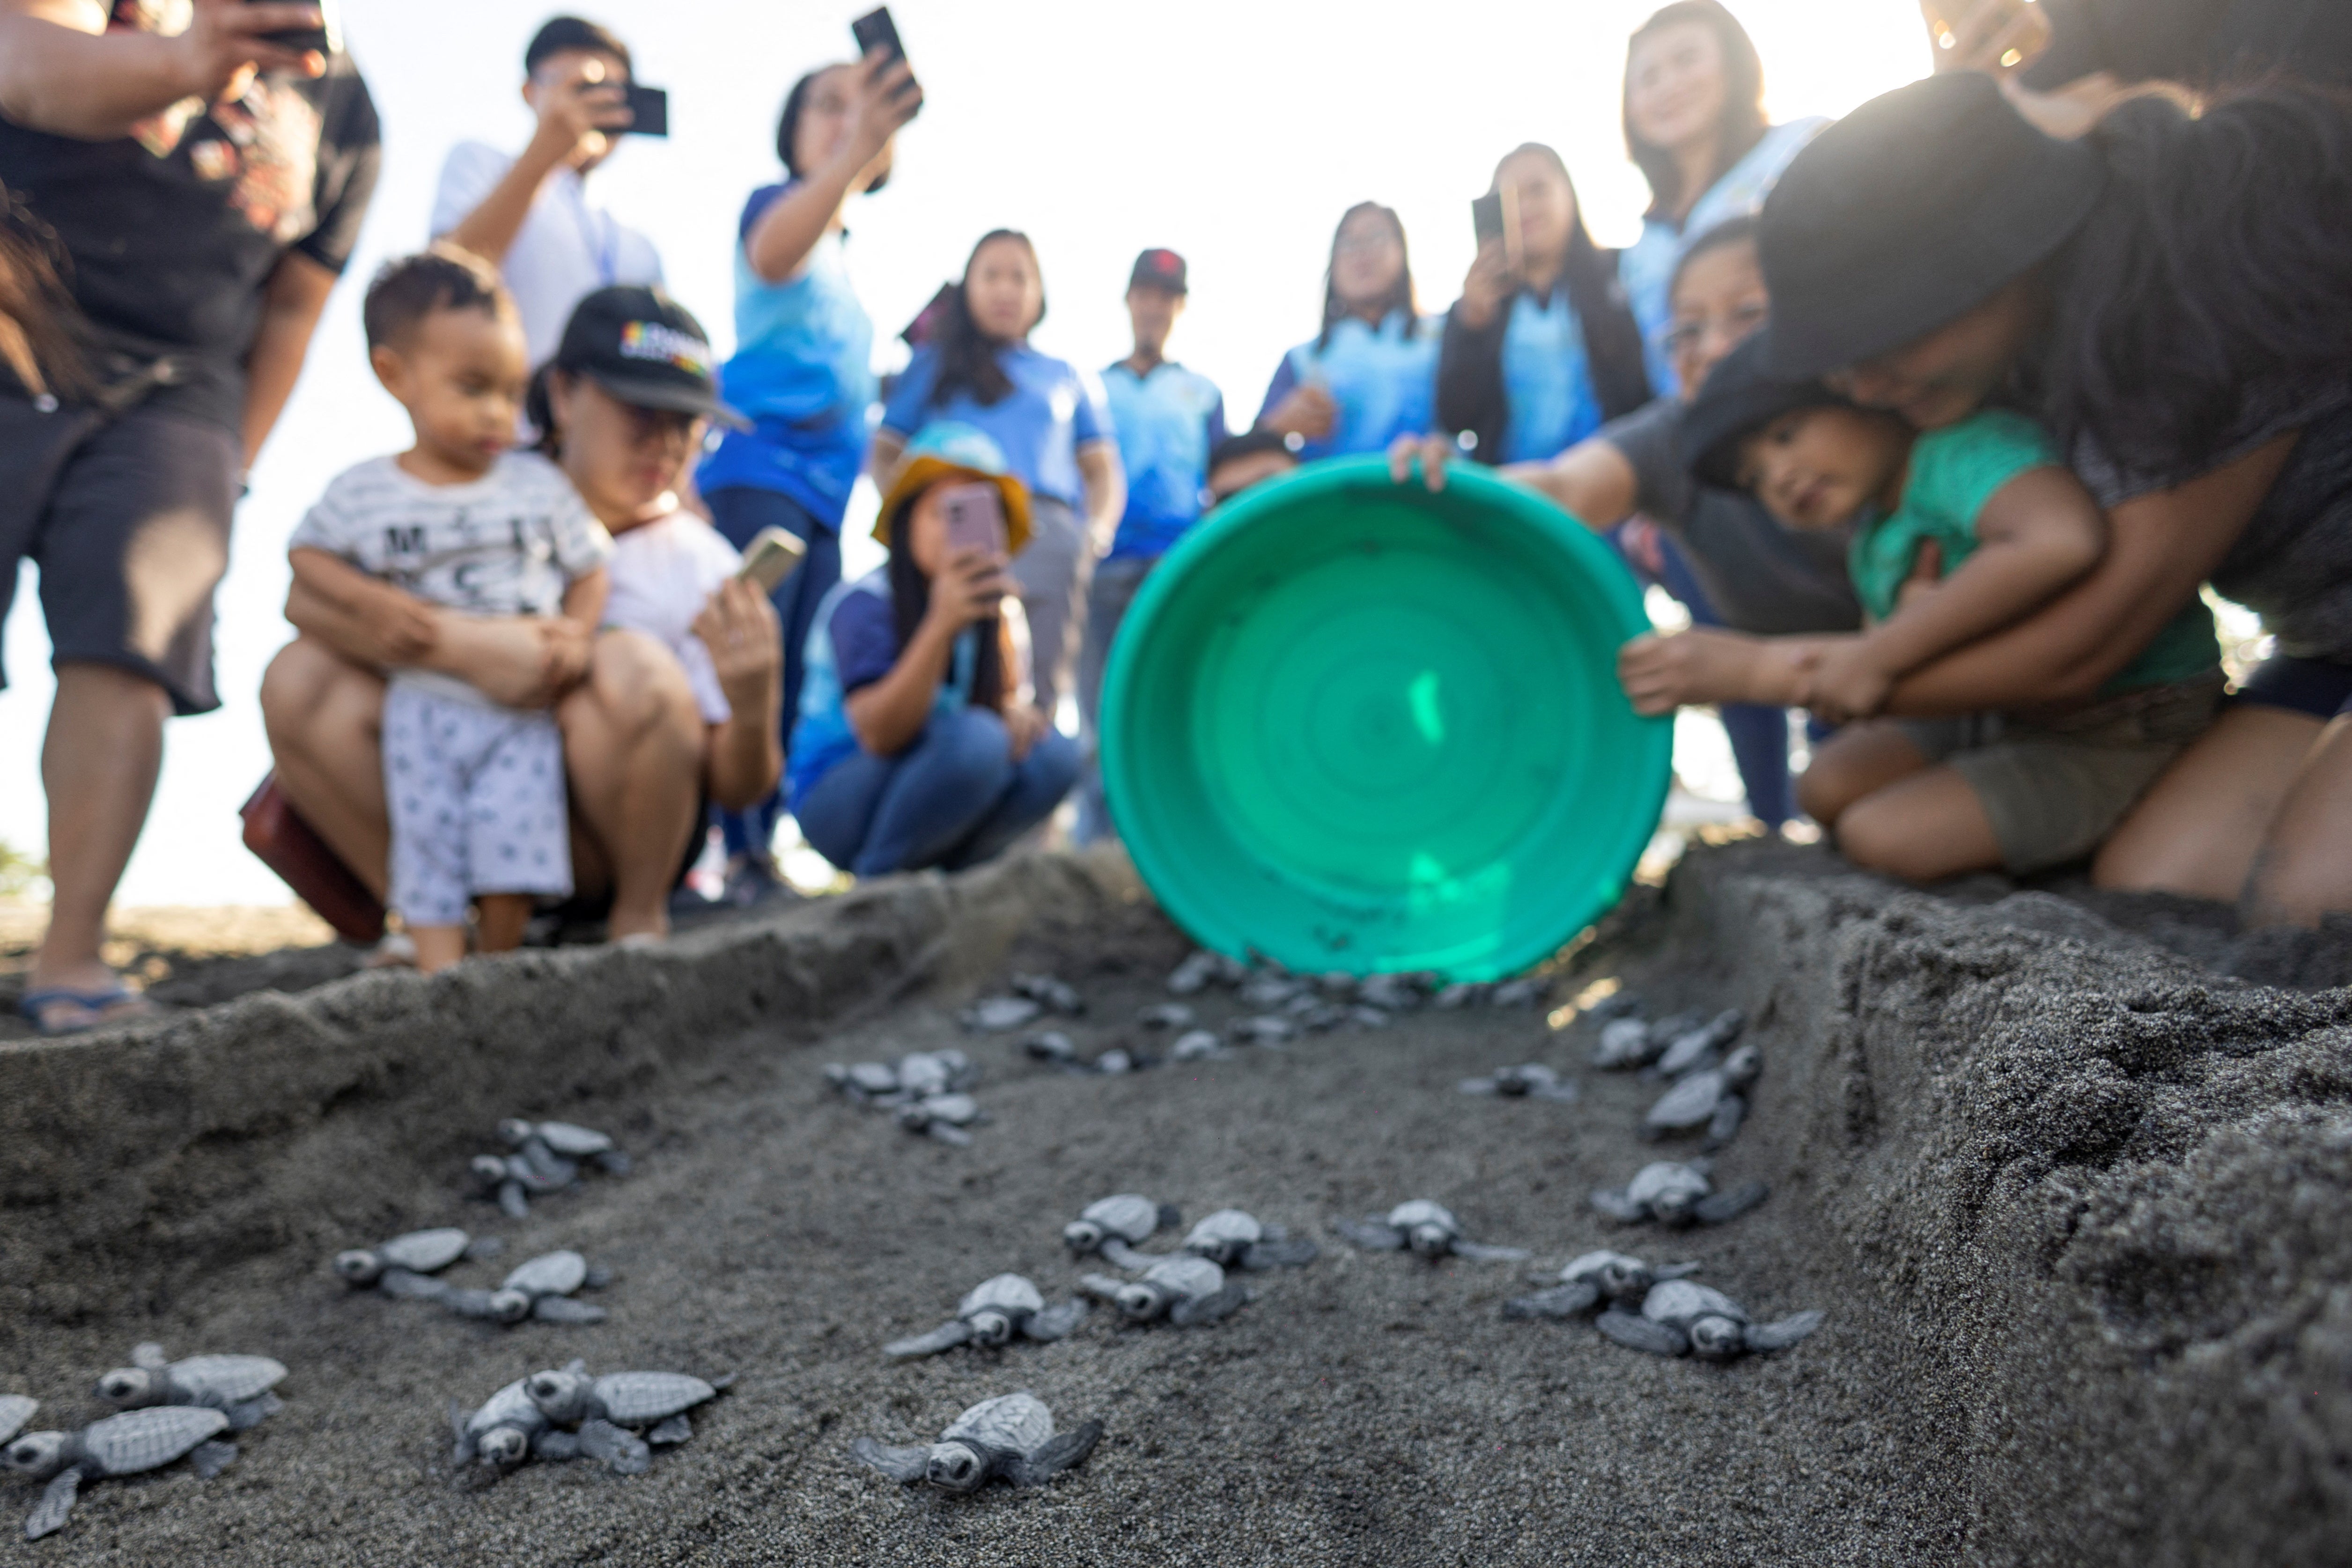 The turtle hatchlings are released